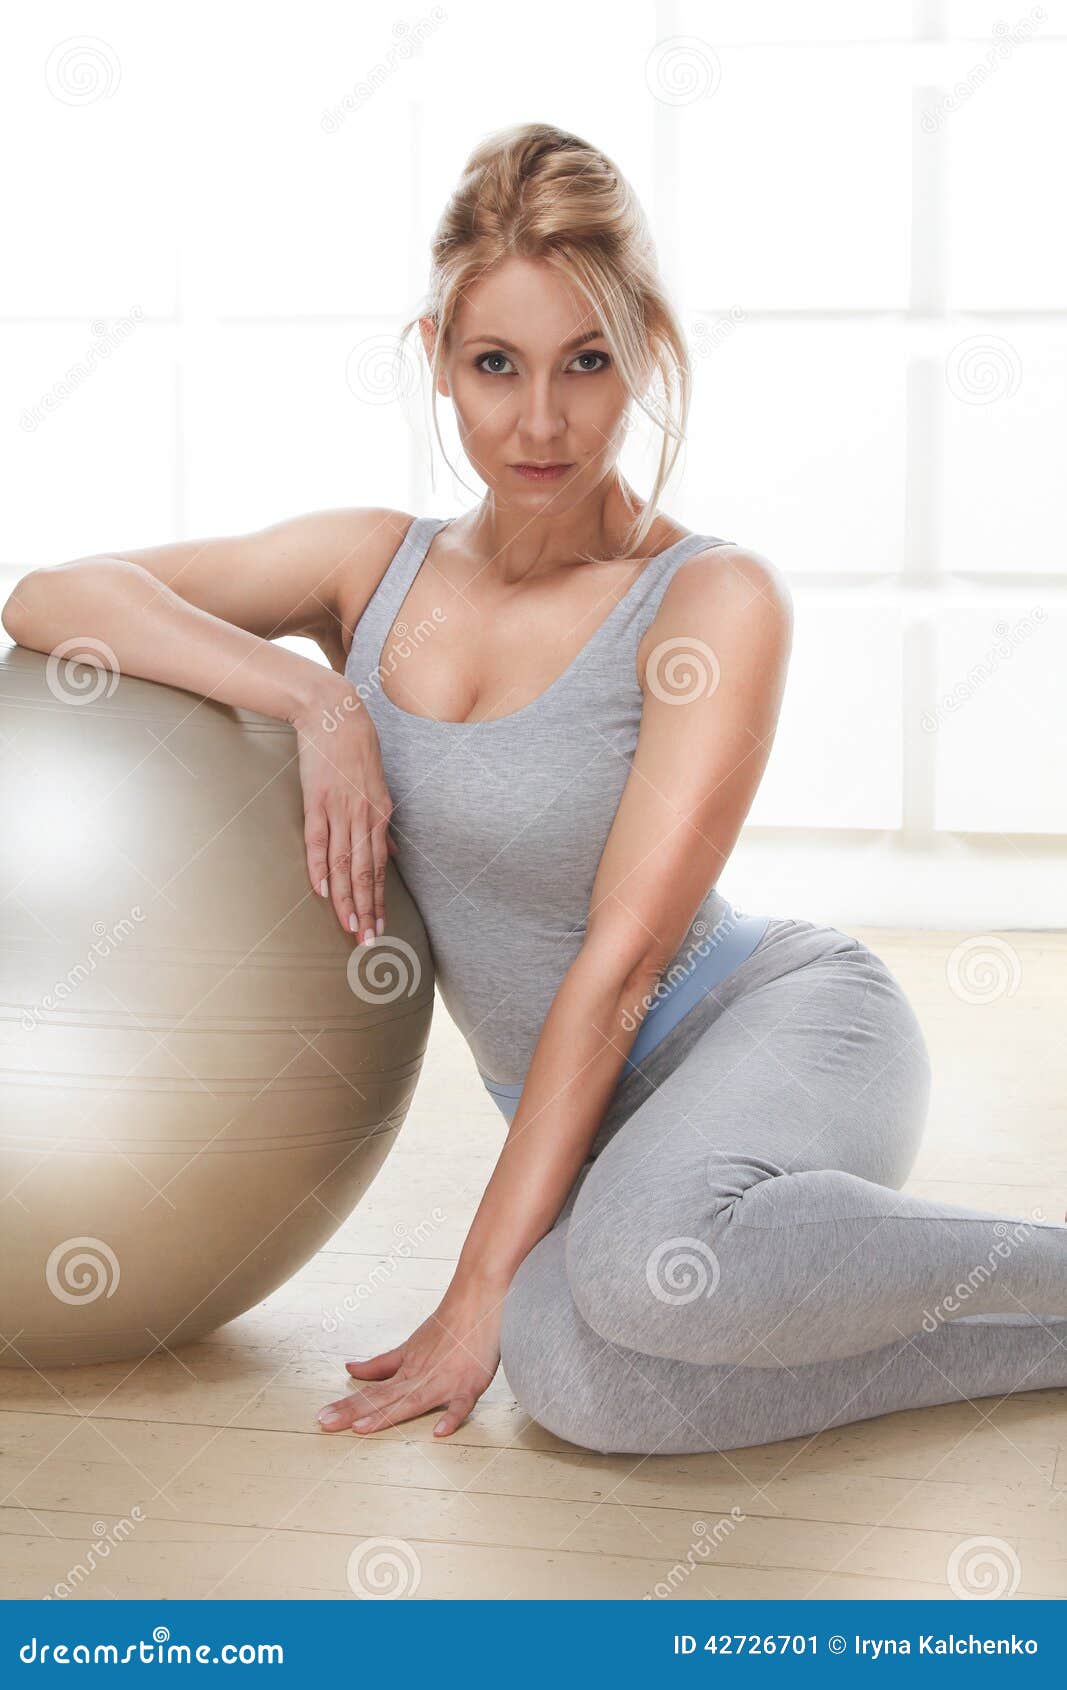 Beautiful Sexy Blonde Perfect Athletic Slim Figure Engaged In Yoga Exercise Or Fitness Lead A